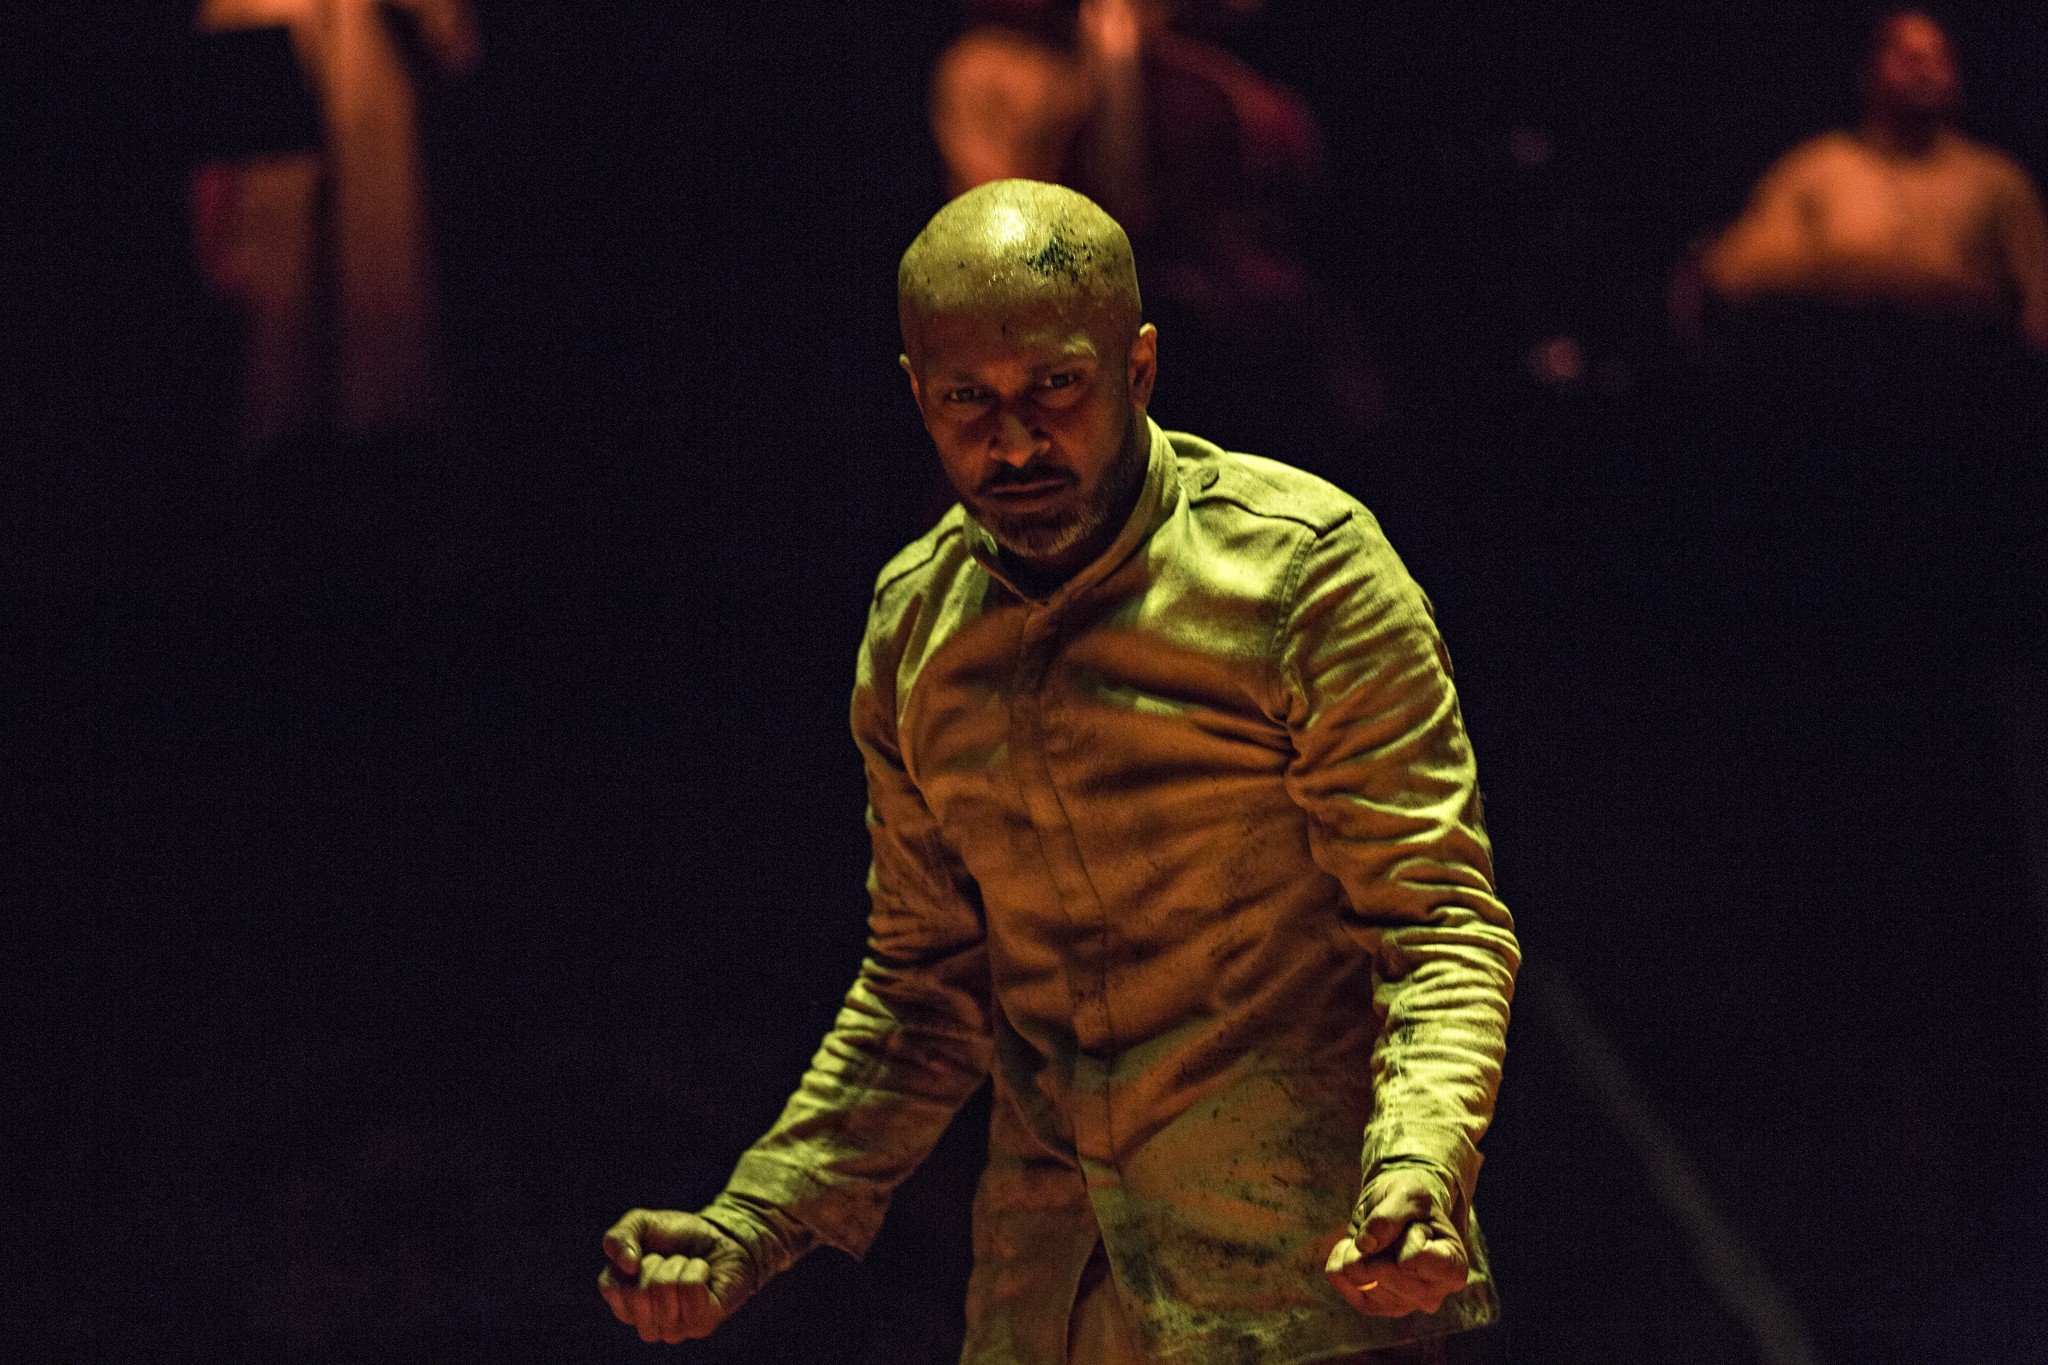 In his last full-length solo dance performance, ‘XENOS’, celebrated choreographer Akram Khan joins five international musicians – percussionist B C Manjunath, vocalist Aditya Prakash, bass player Nina Harries, violinist Clarice Rarity and saxophonist Tamar Osborn – to give a voice to the millions of soldiers of colour who fought in the First World War for the British Empire but are rarely acknowledged in history books.